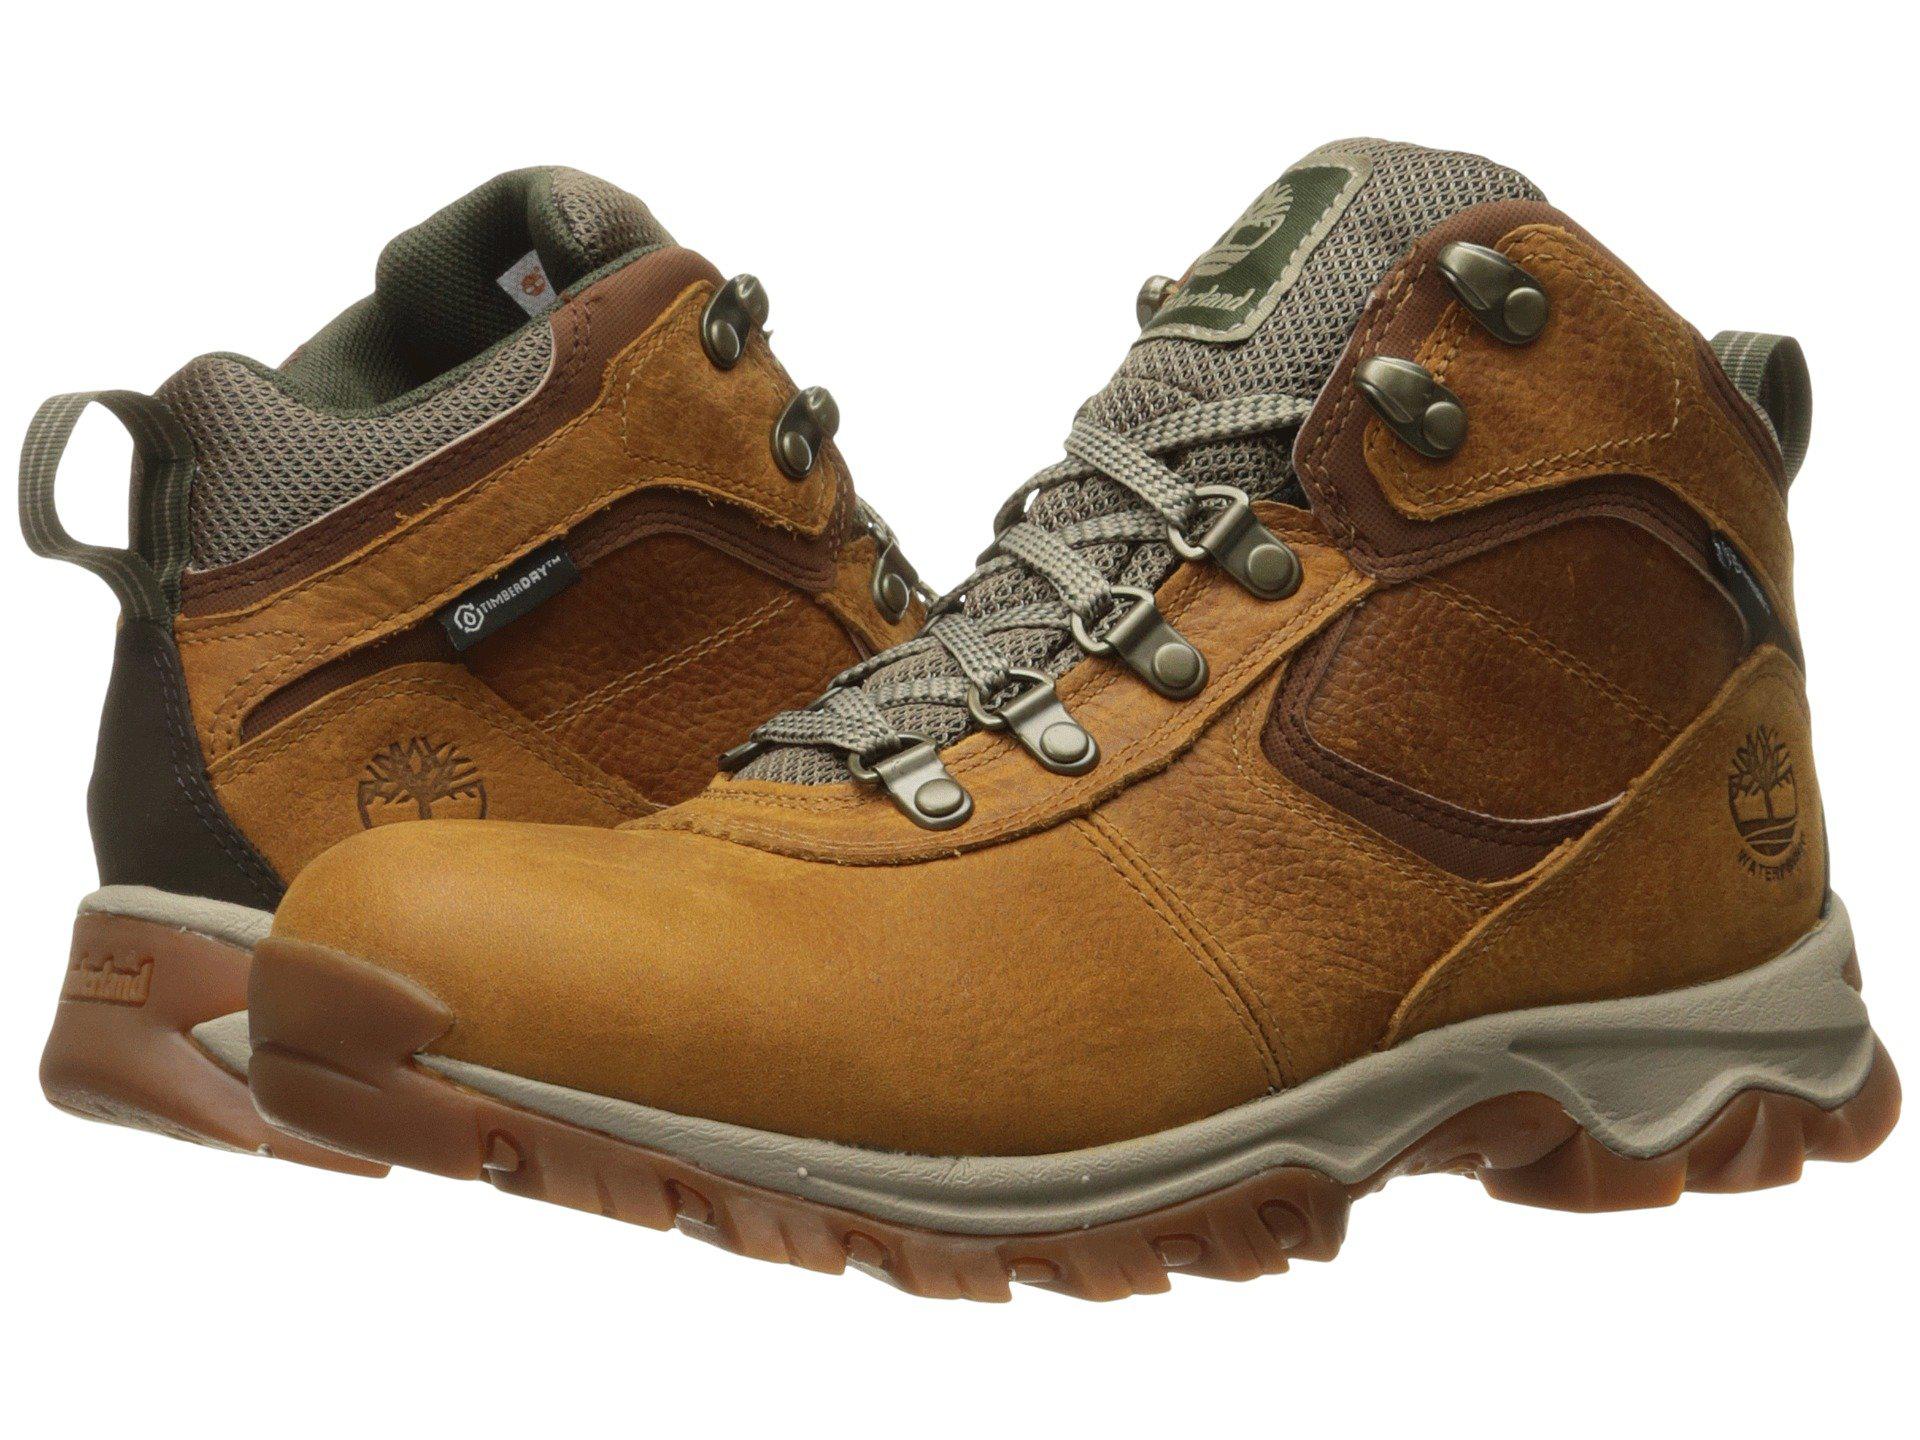 Timberland Mt. Maddsen Mid Leather Wp Hiking Boot in Brown for Men - Lyst